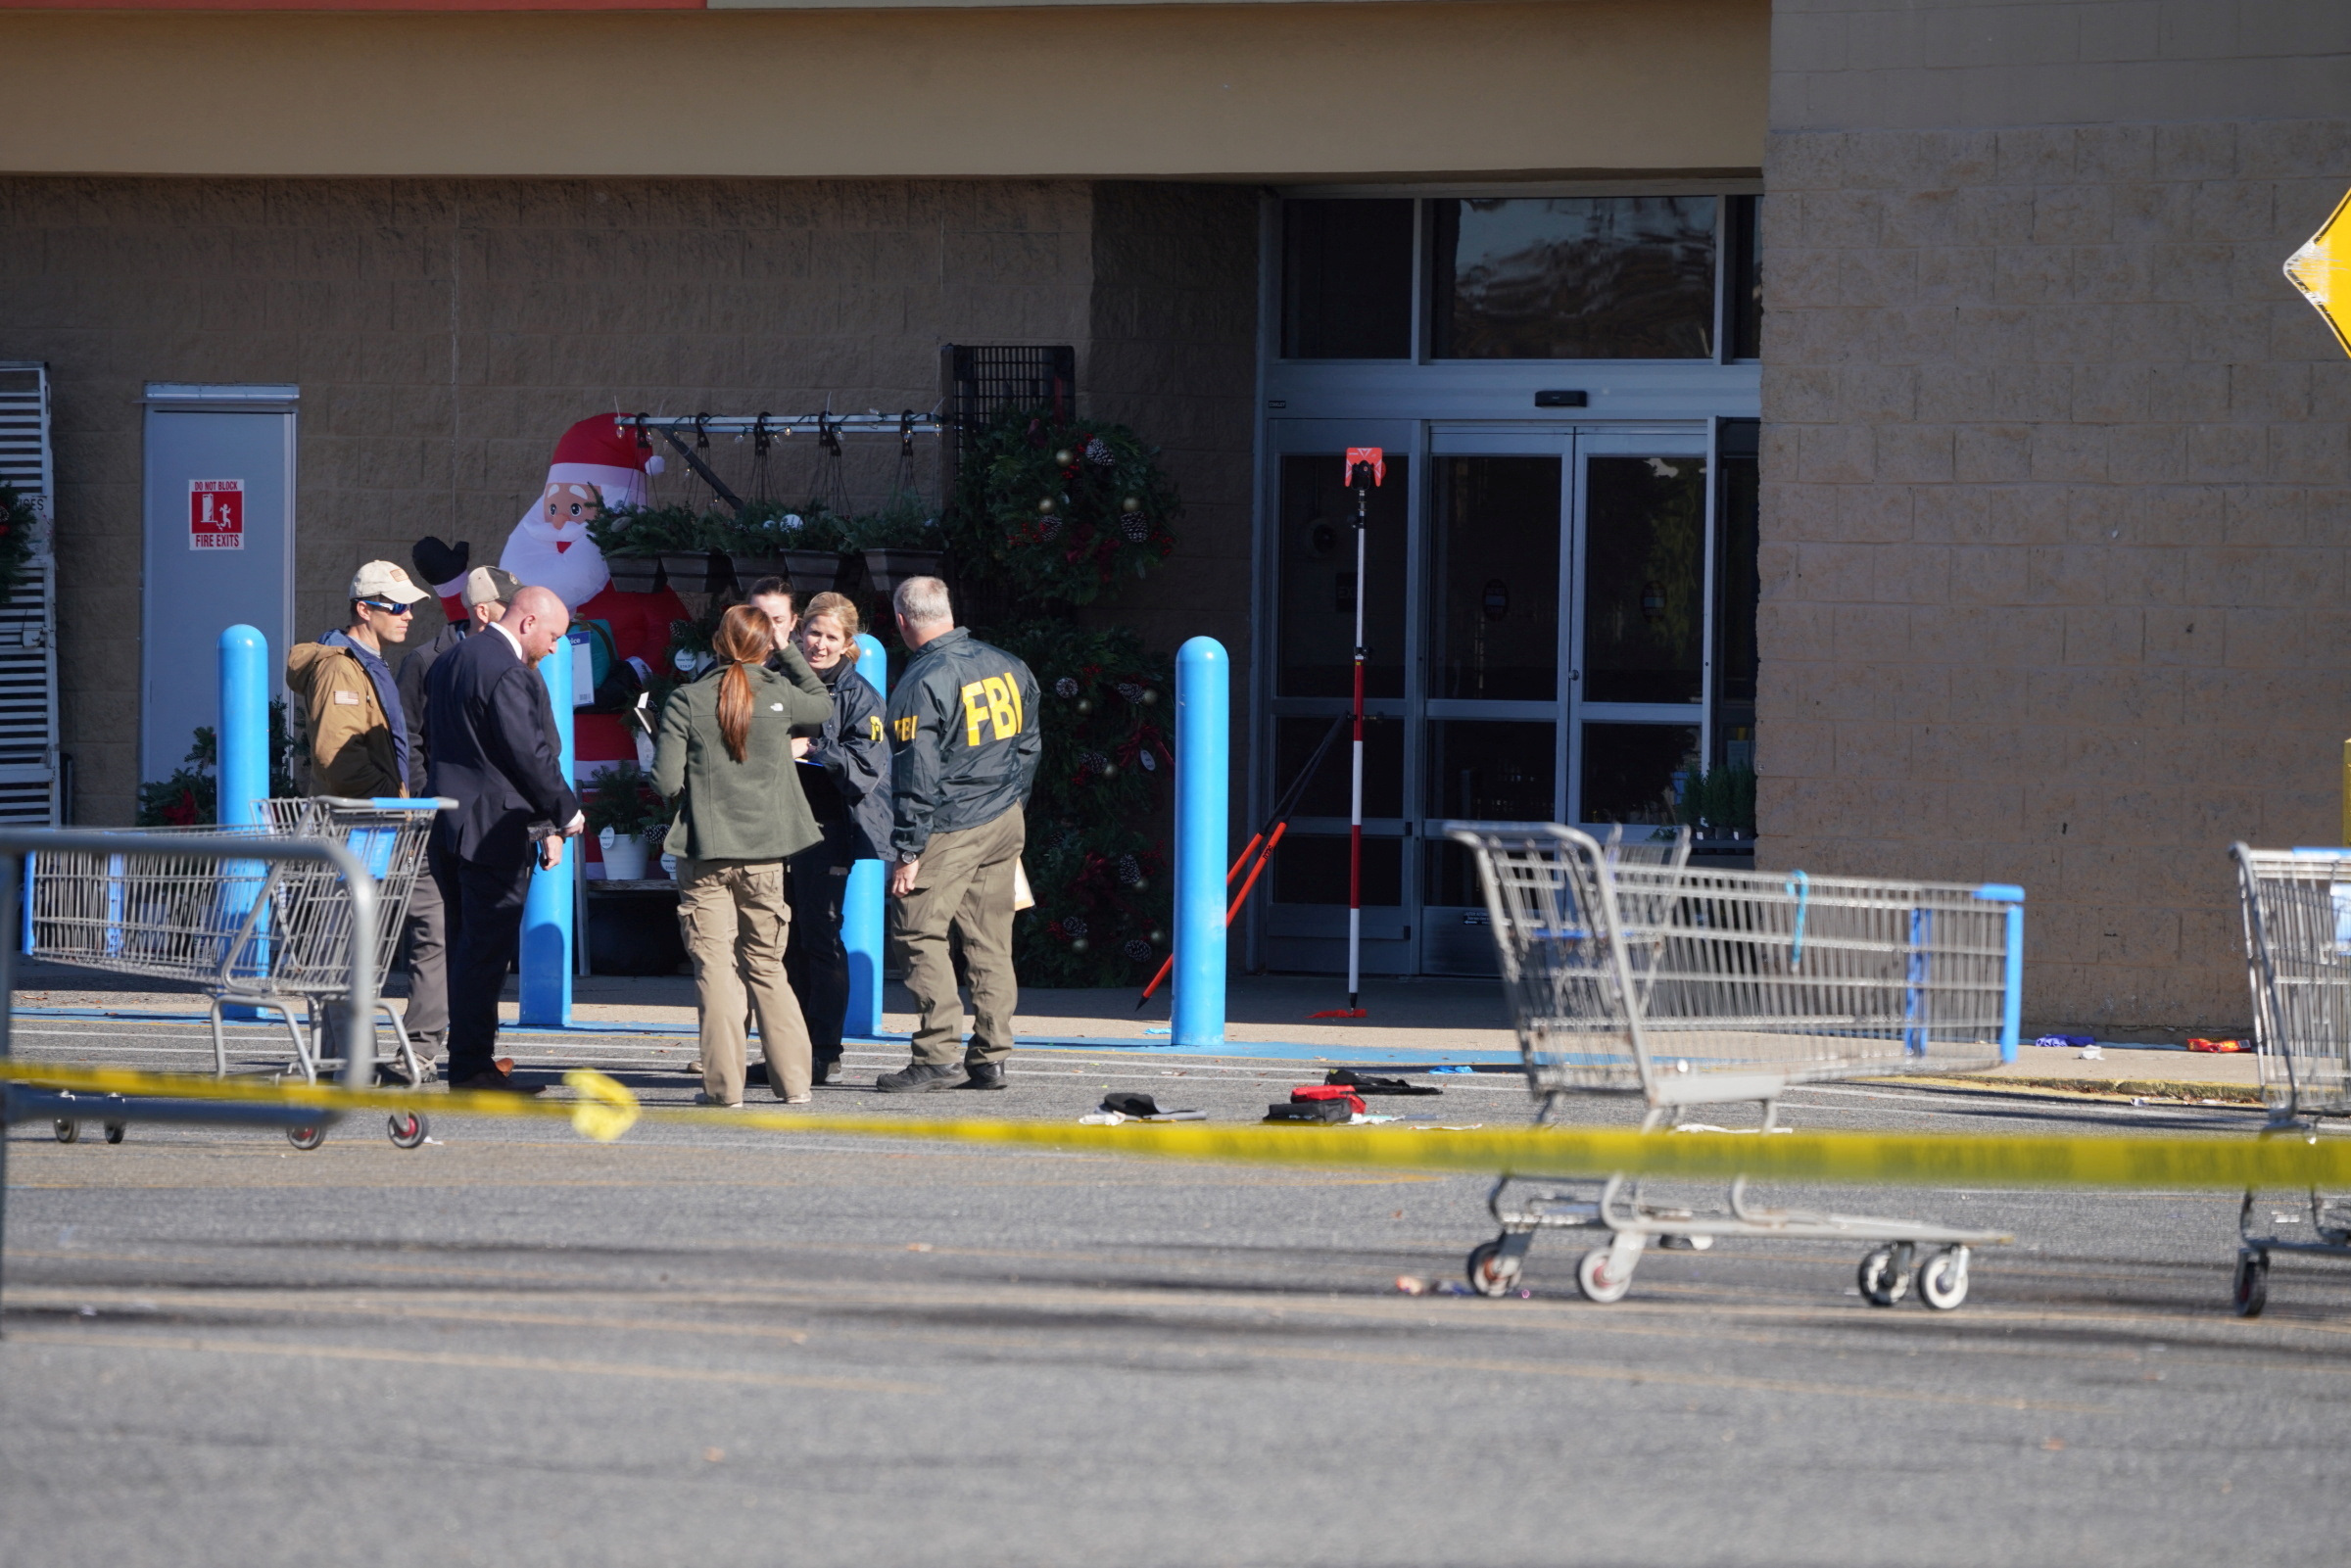 After a mass shooting at a Walmart in Chesapeake